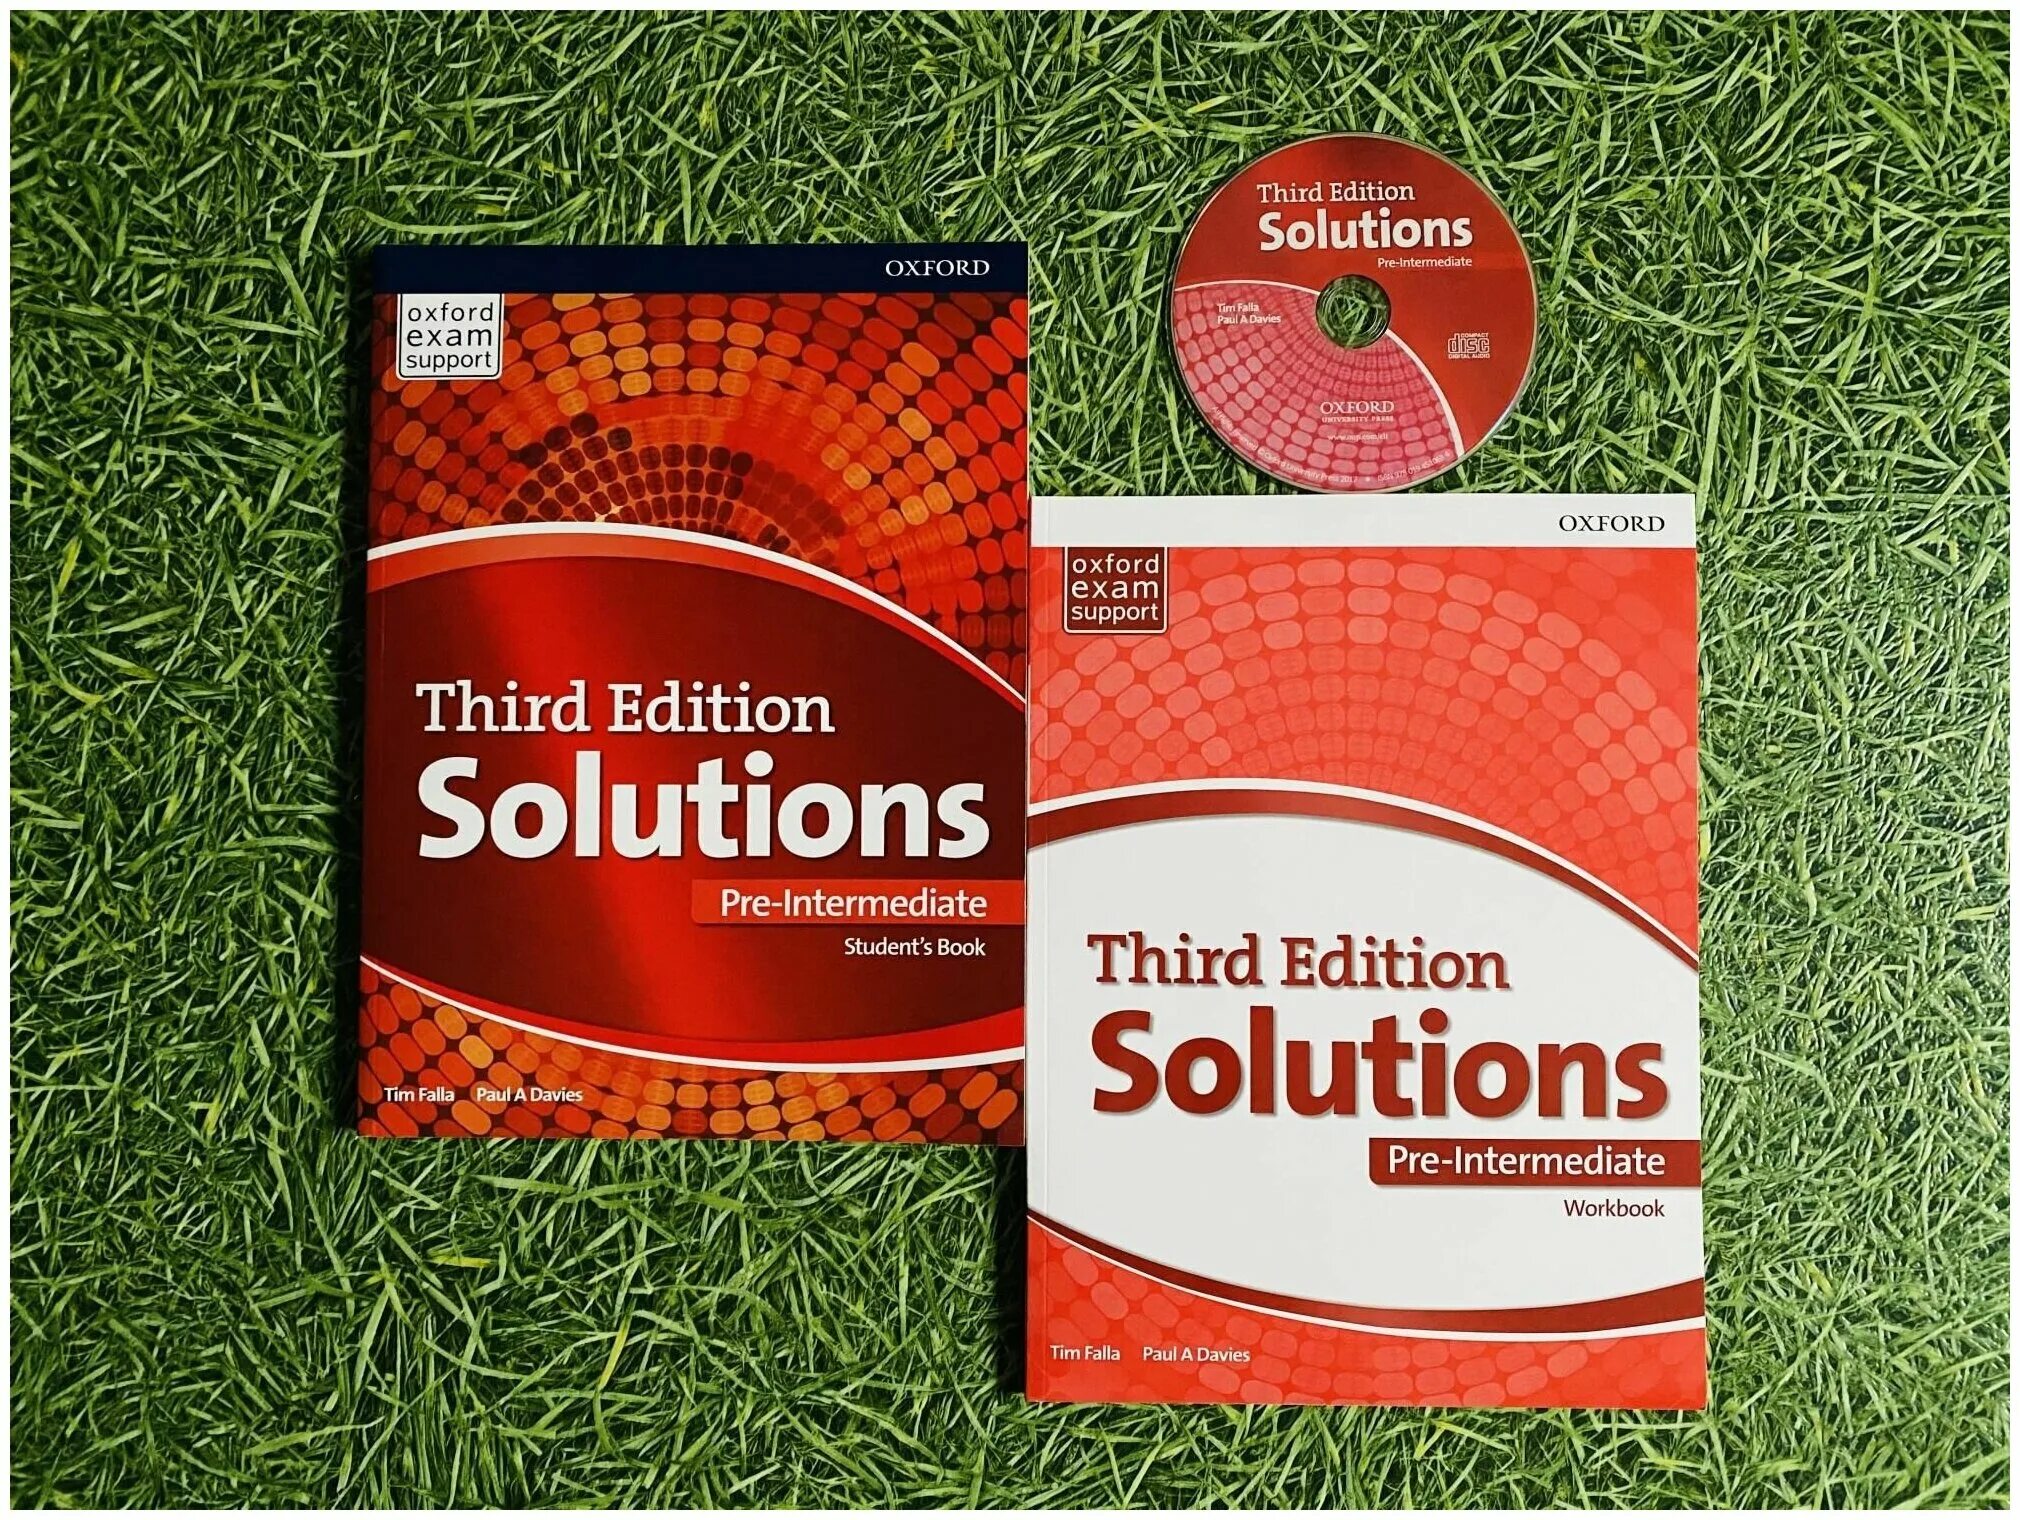 Solutions elementary 5 класс. Solutions: pre-Intermediate. Third Edition solutions. Solutions pre-Intermediate 3rd. Solutions учебник.